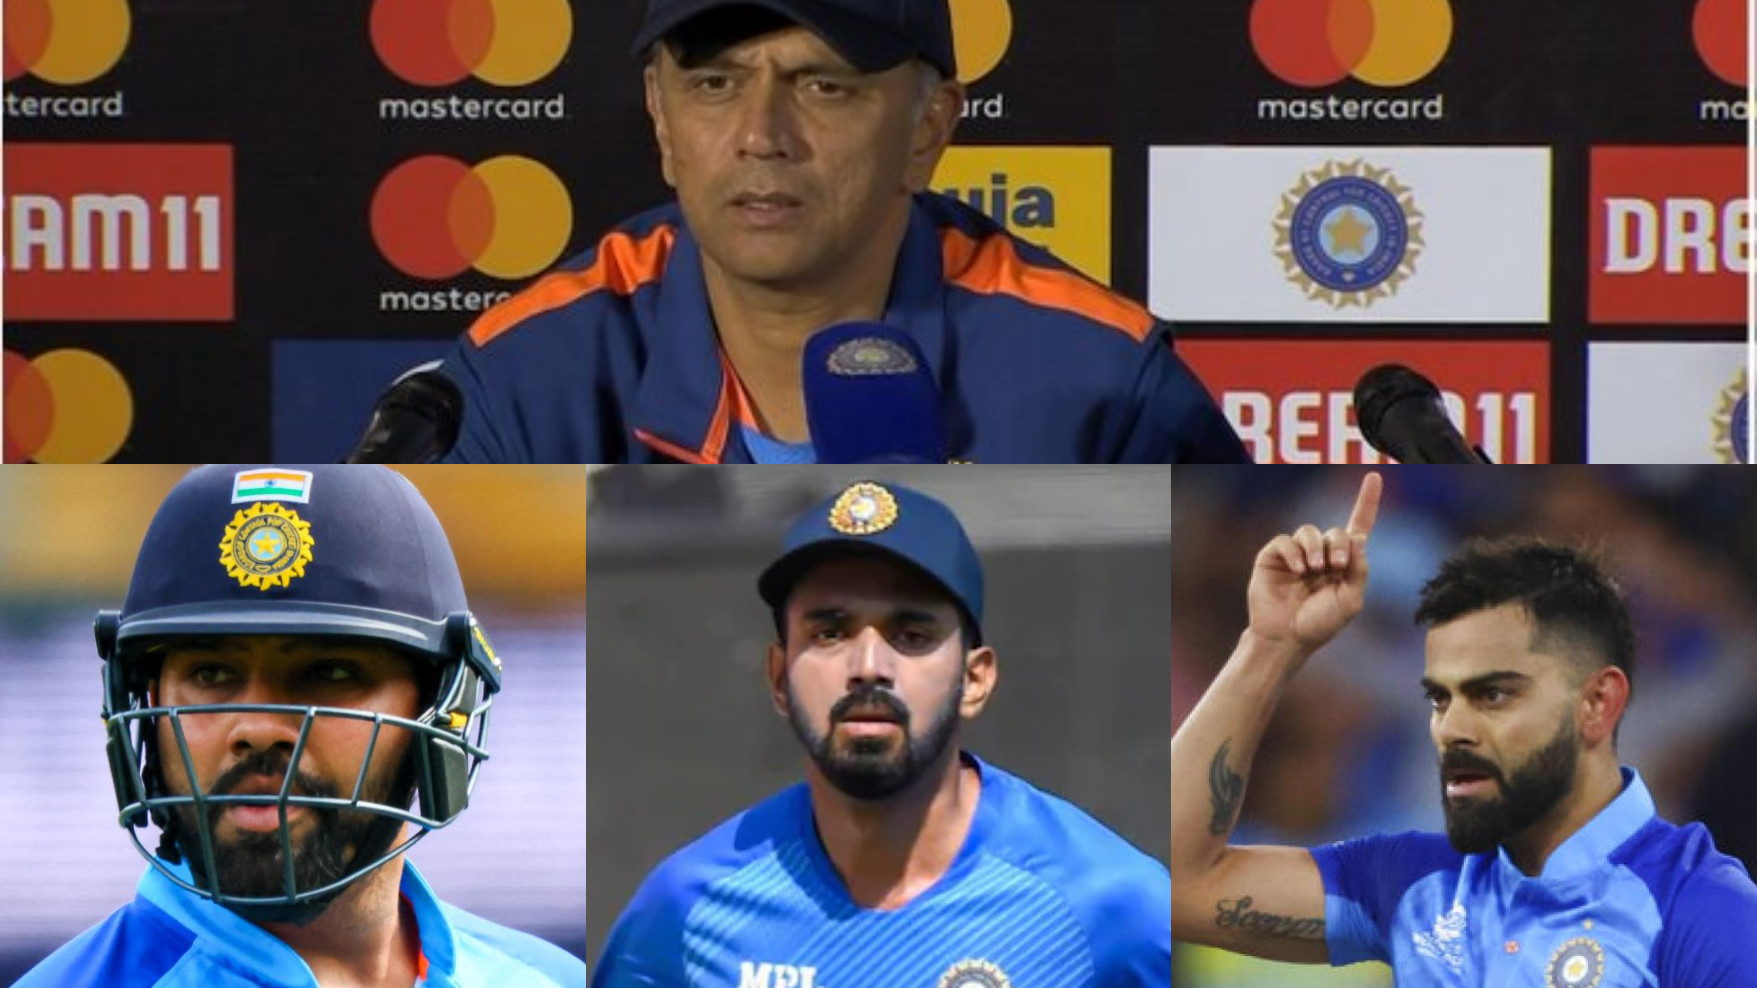 IND v SL 2023: ‘Team rebuilding for next T20 World Cup’- Dravid hints at futures of Rohit, Rahul and Kohli in T20Is